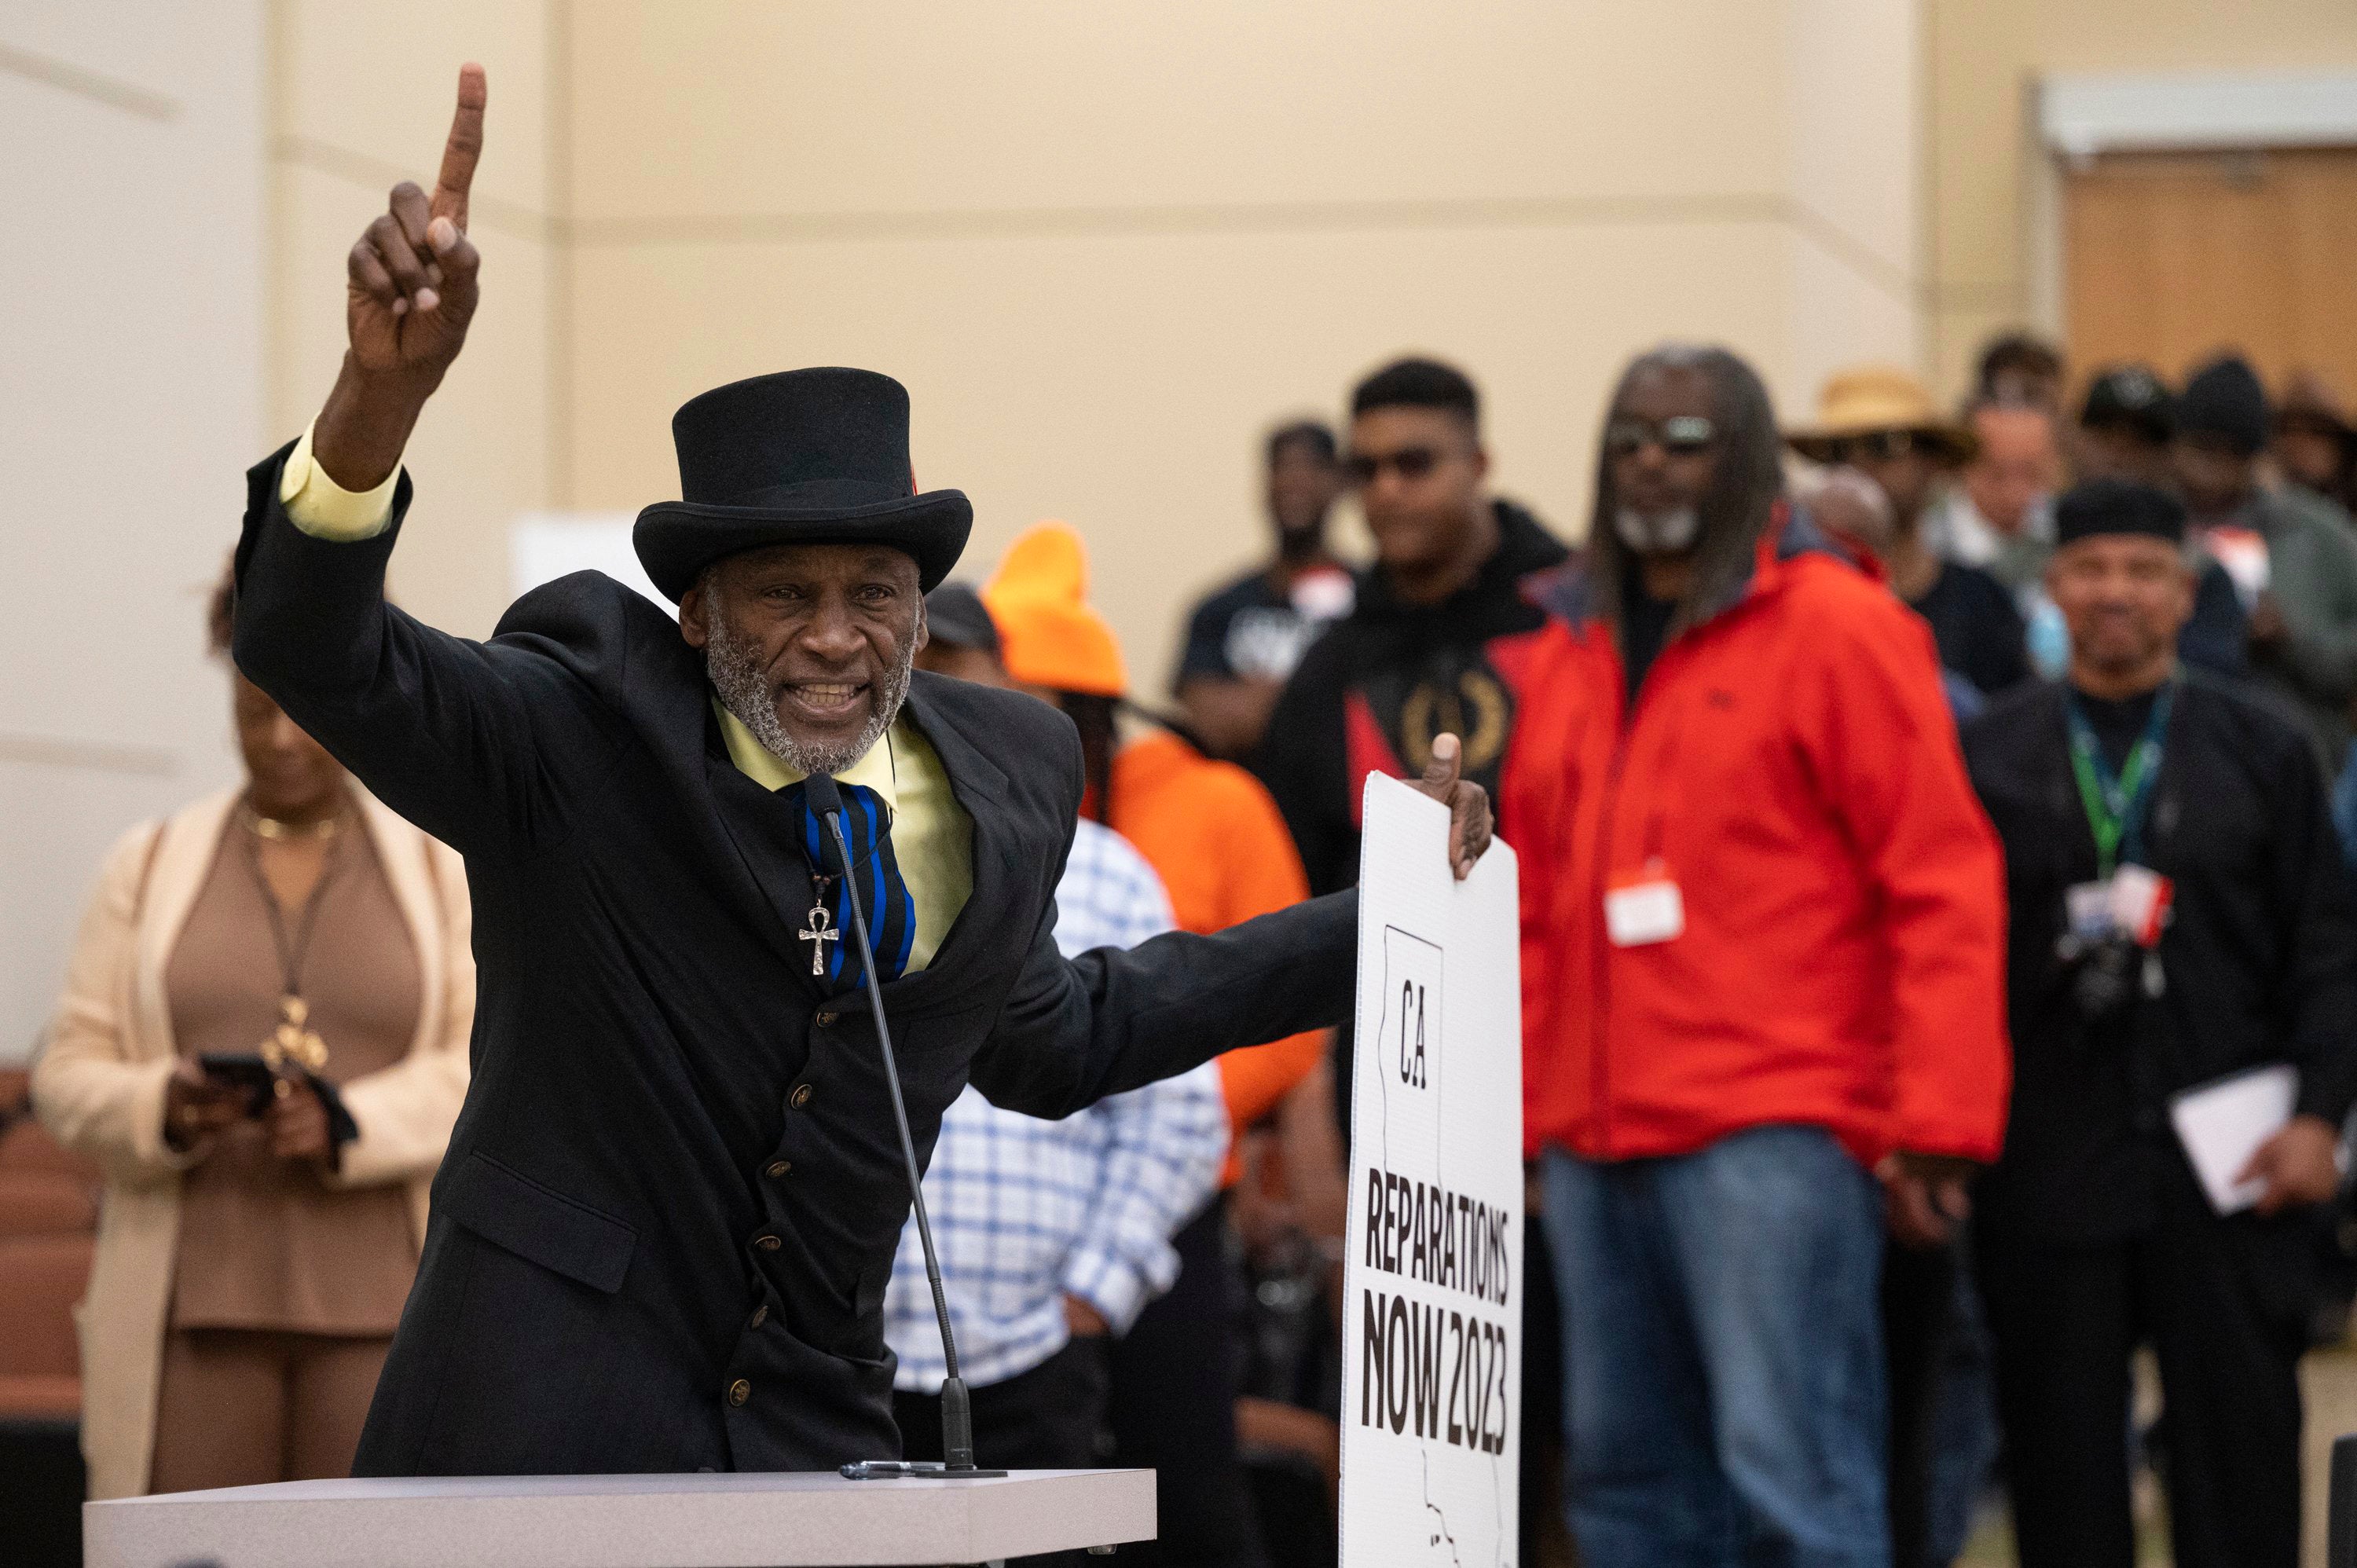 Morris Griffin of Los Angeles speaks during the public comment portion of the Reparations Task Force meeting in Sacramento, California on 3 March 2023